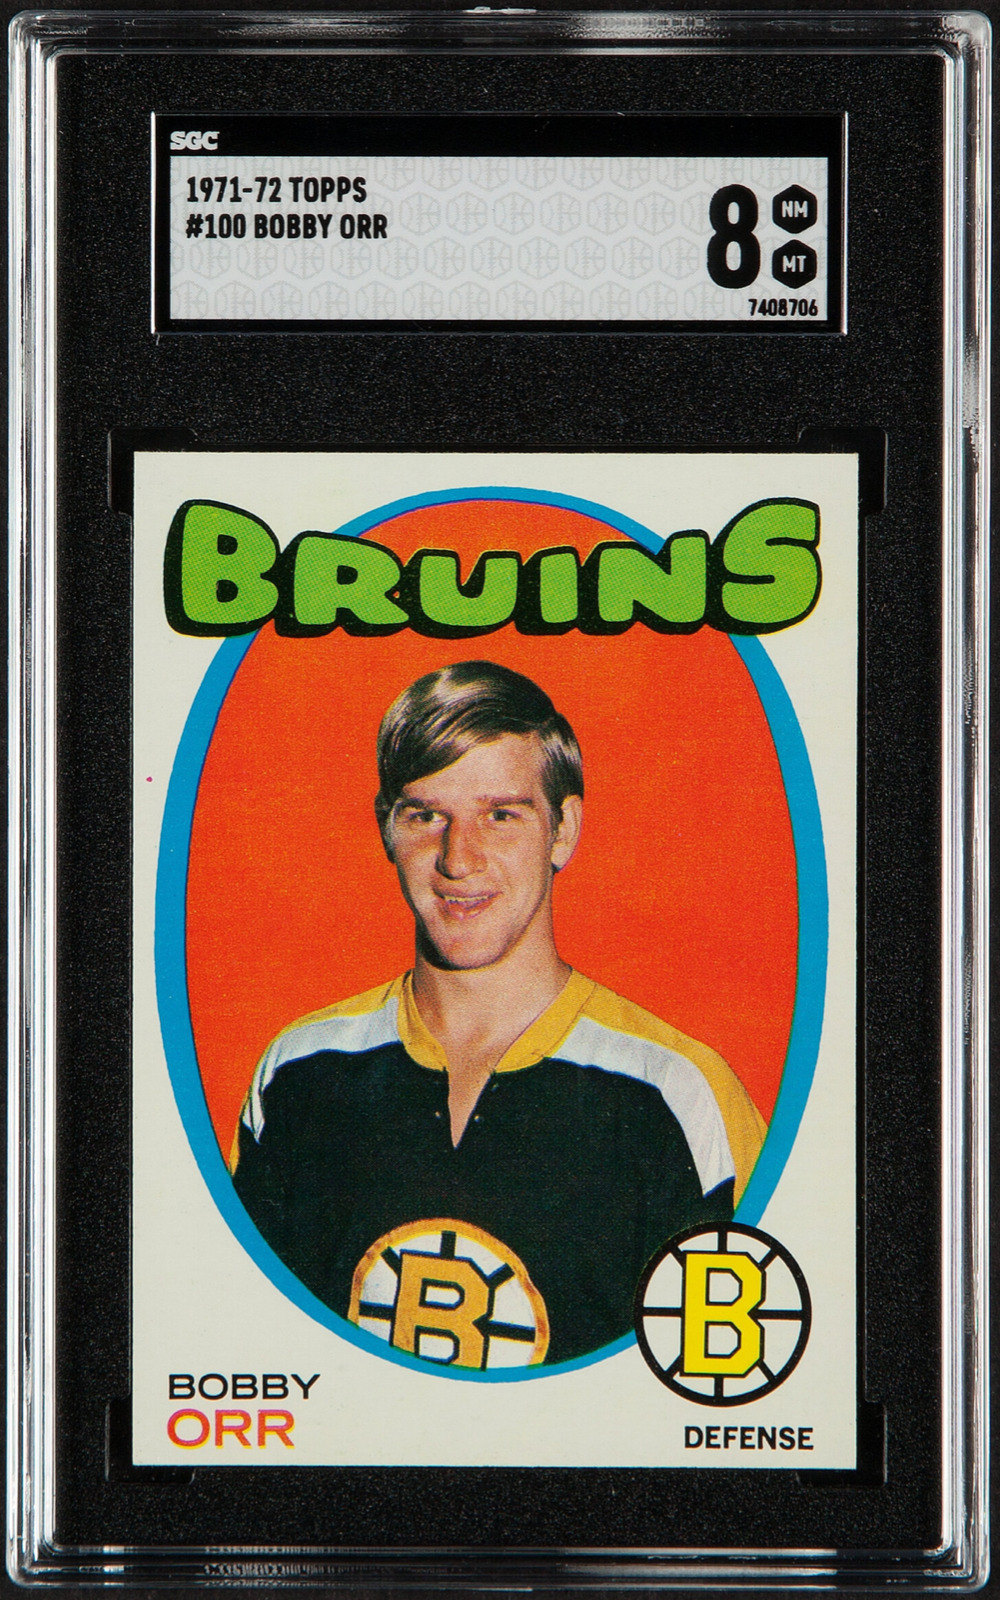 2018/19 SP Authentic Hockey #SOTTBO Bobby Orr Sign of the Times Auto PSA 10  (GEM MT)